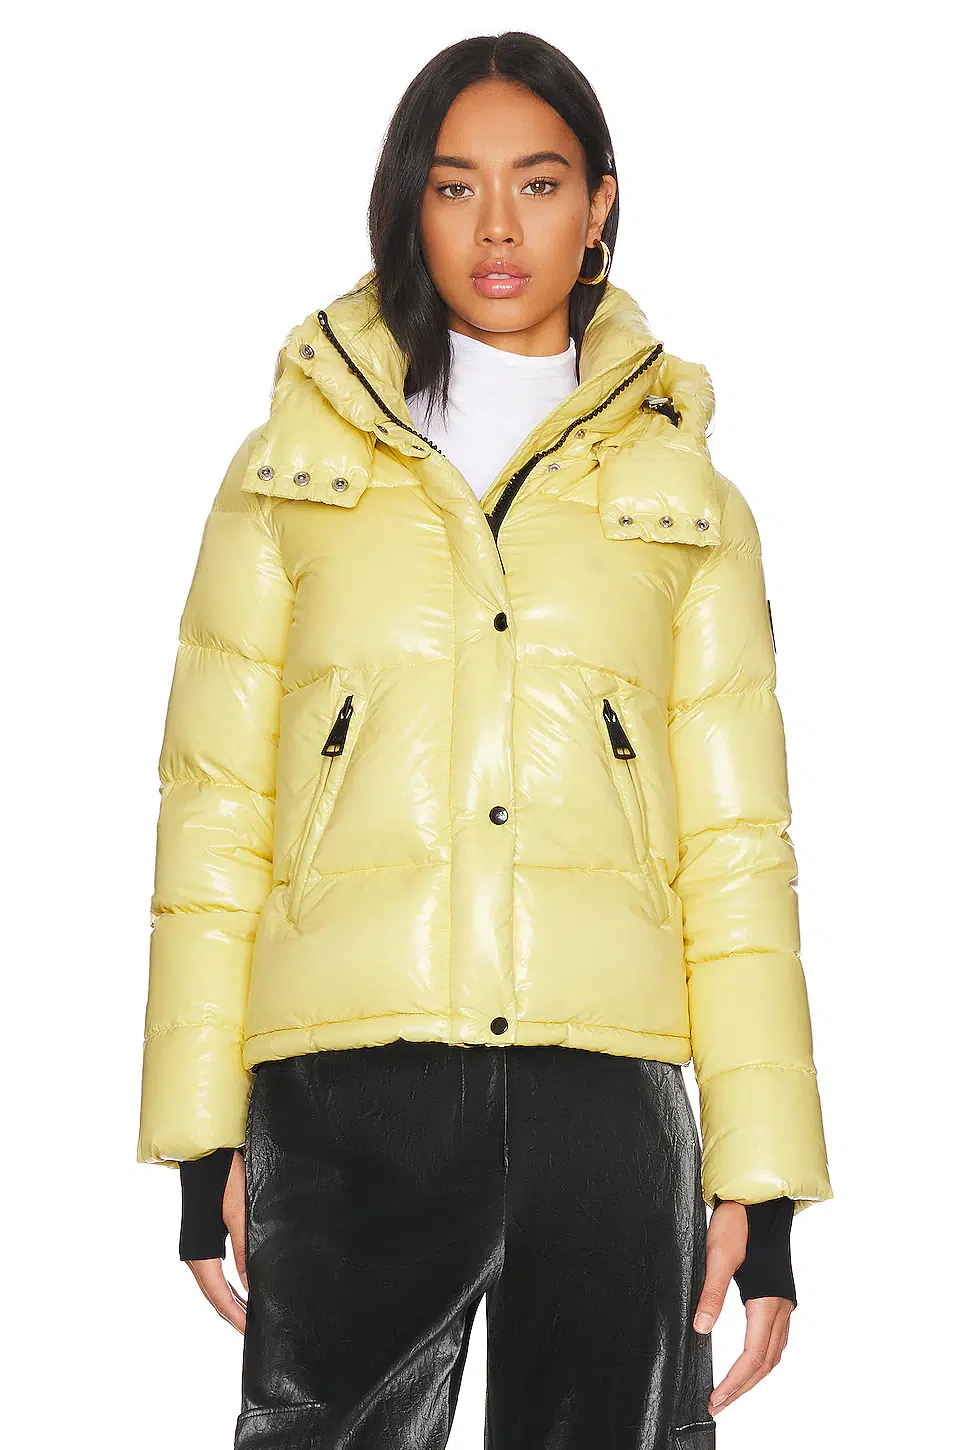 The 16 Best Yellow Puffer Jackets to Shop Right Now